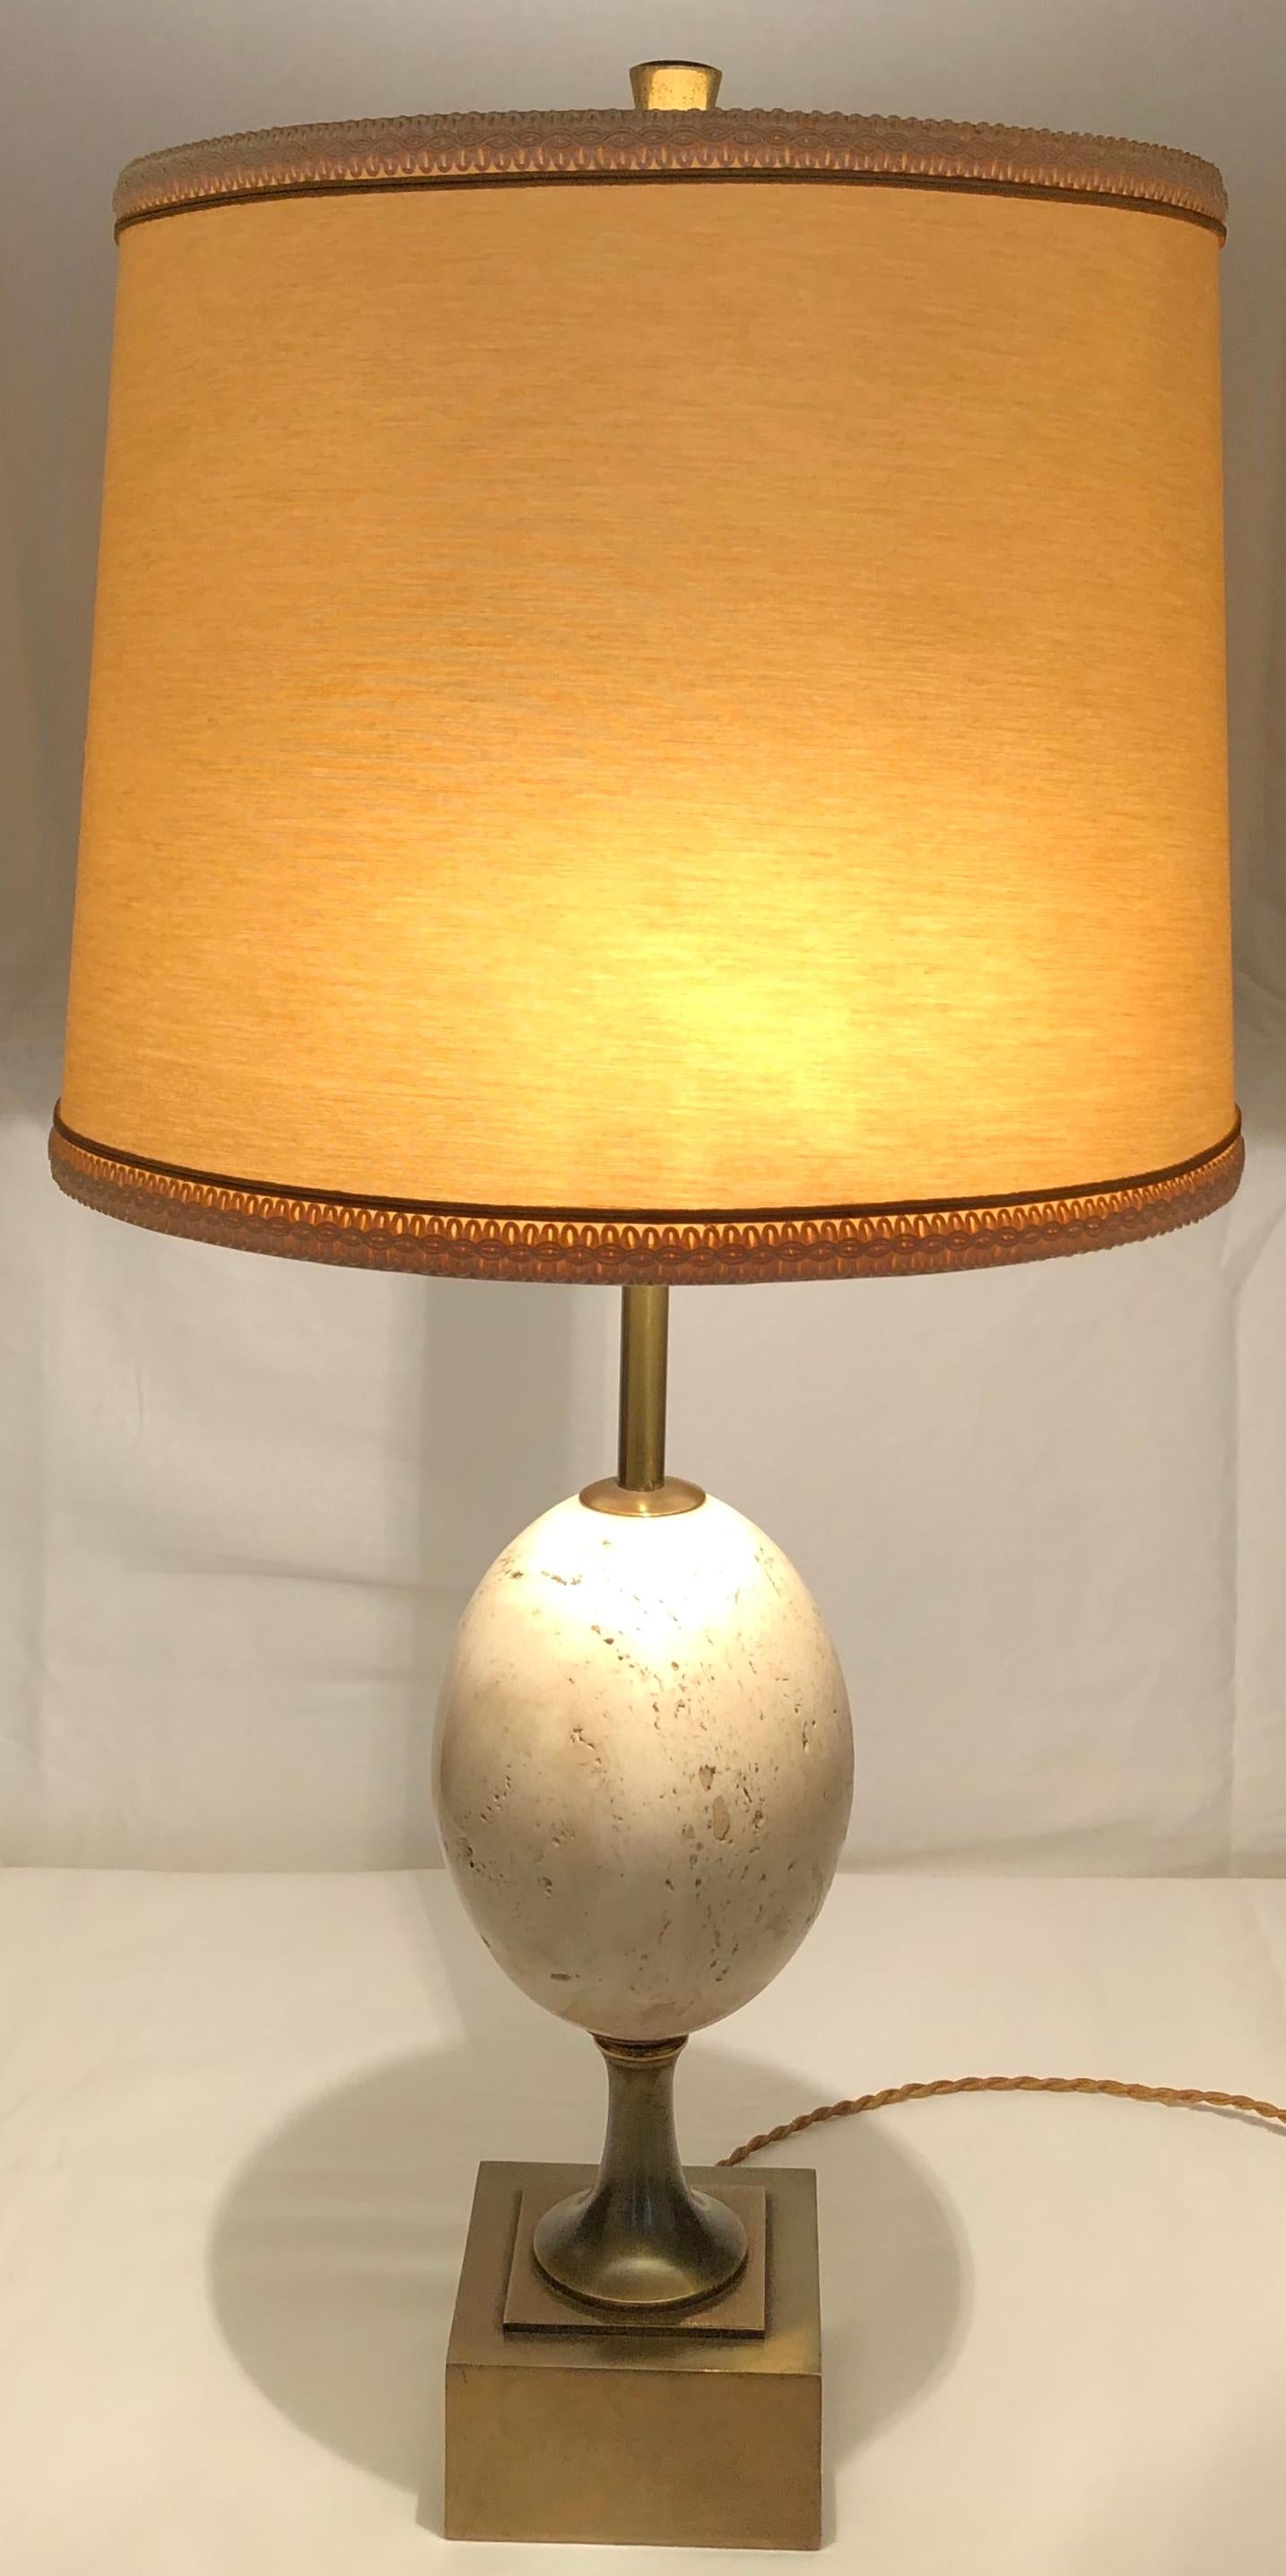 Original Maison Charles table or console lamp with egg shaped travertine center on brass base and new ivory colored shade. This is a signature piece from the well respected establishment. Very elegant appearance. 
Bears the makers mark.

The lamp is